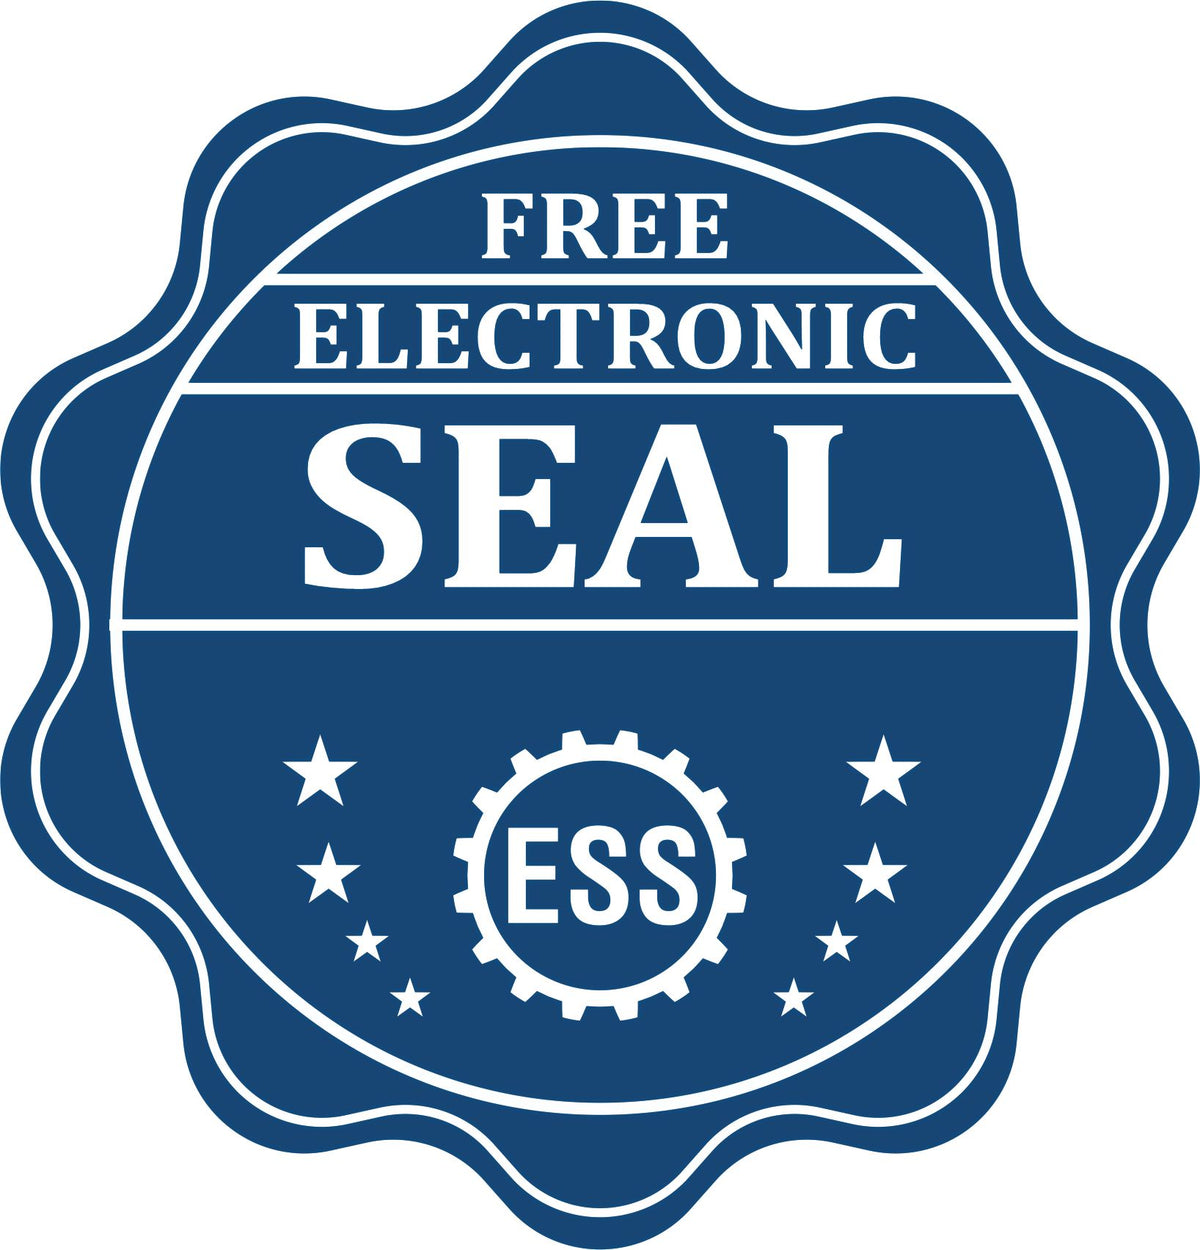 A badge showing a free electronic seal for the Slim Pre-Inked Kentucky Landscape Architect Seal Stamp with stars and the ESS gear on the emblem.